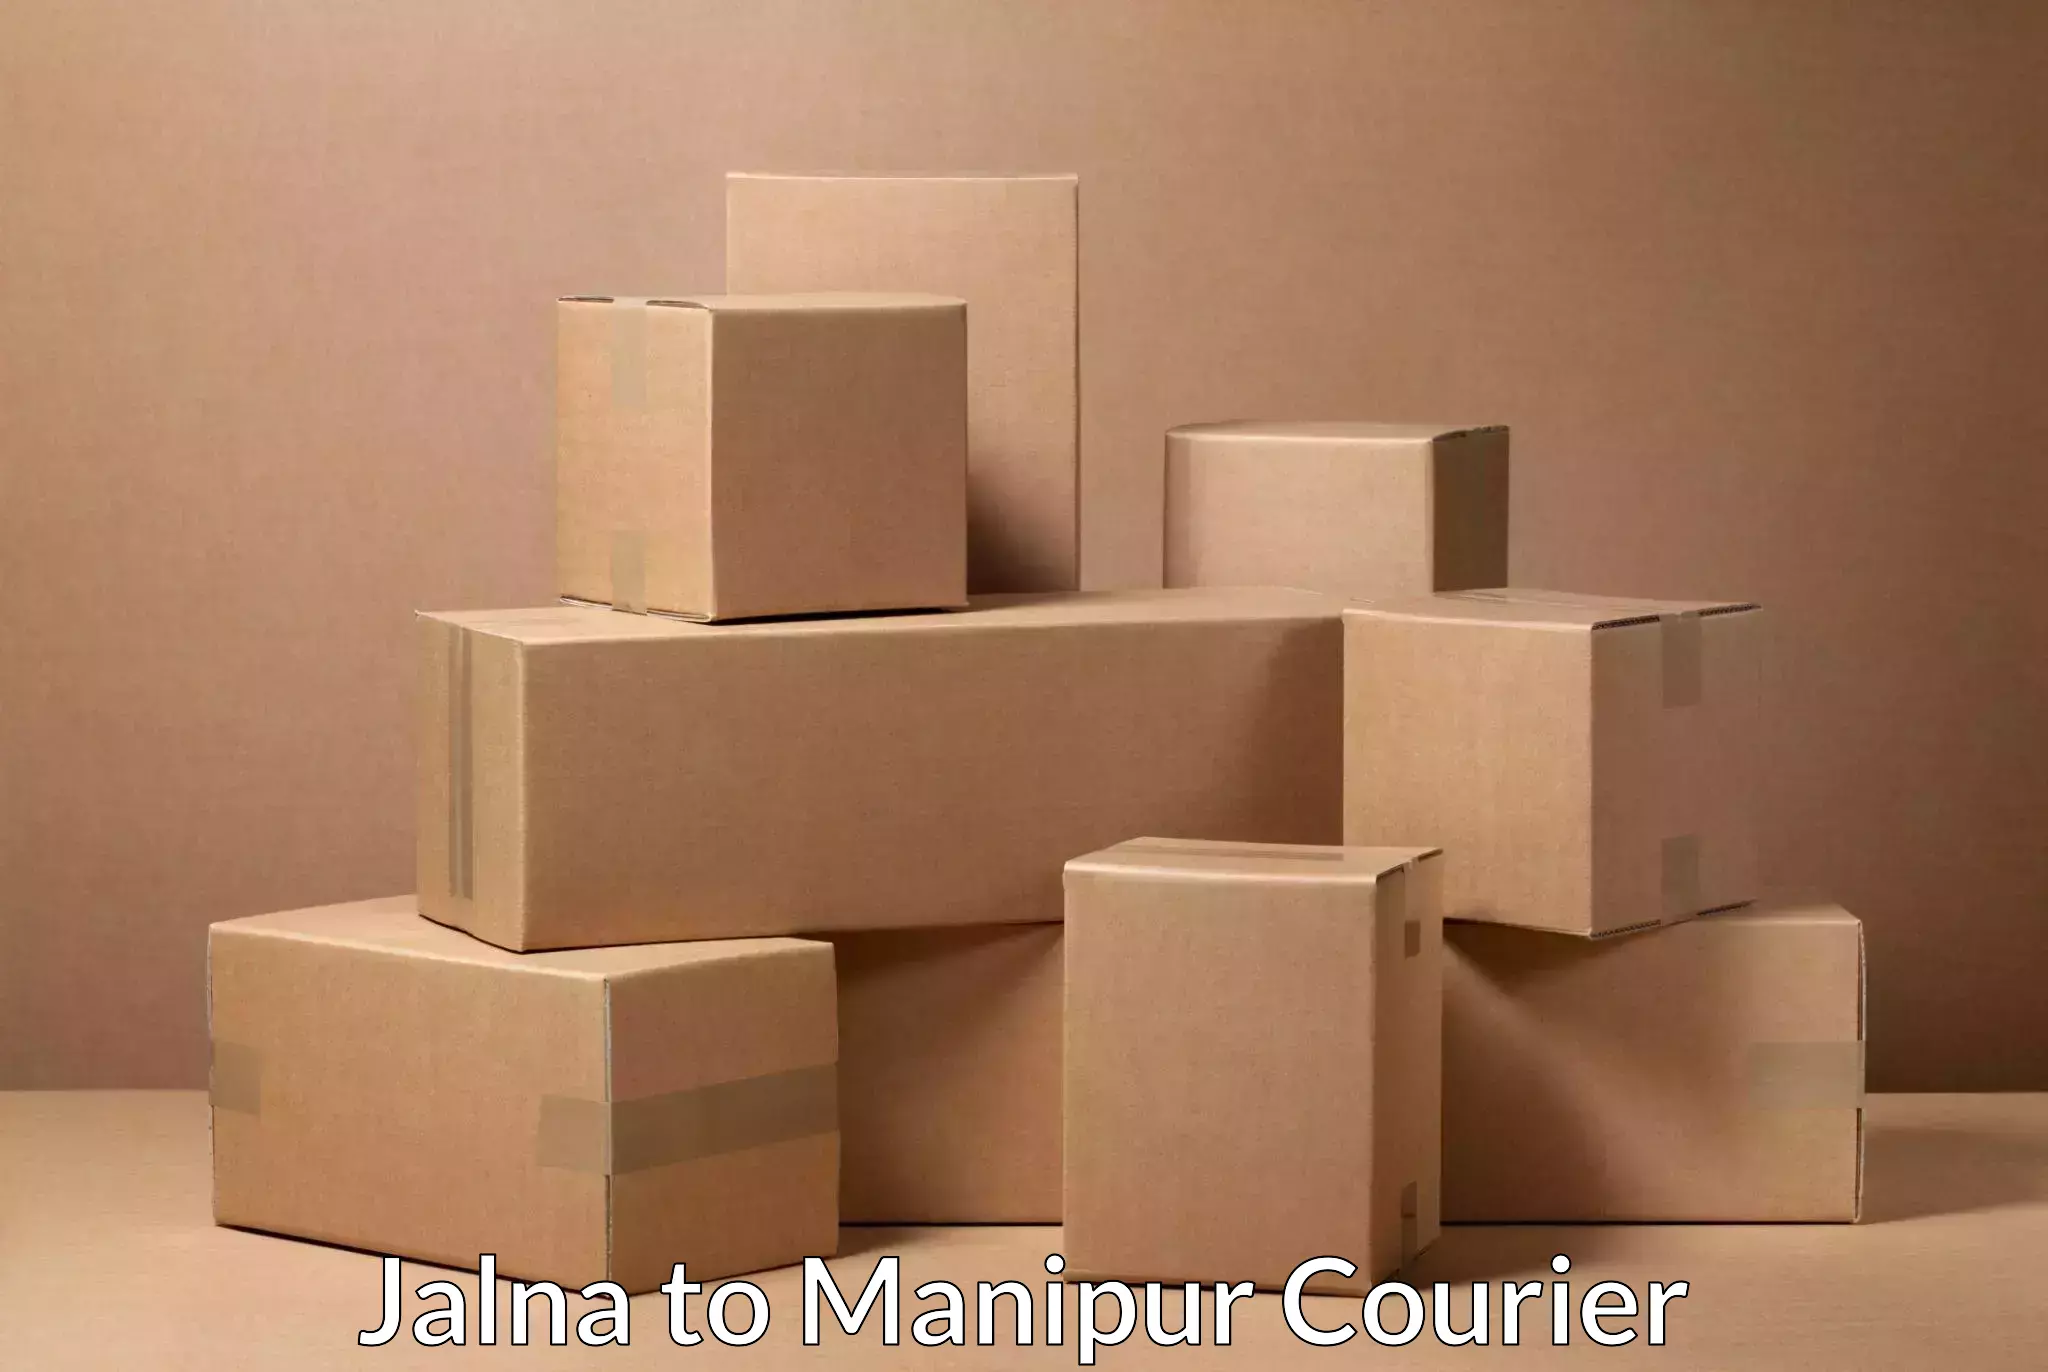 Online shipping calculator Jalna to Manipur